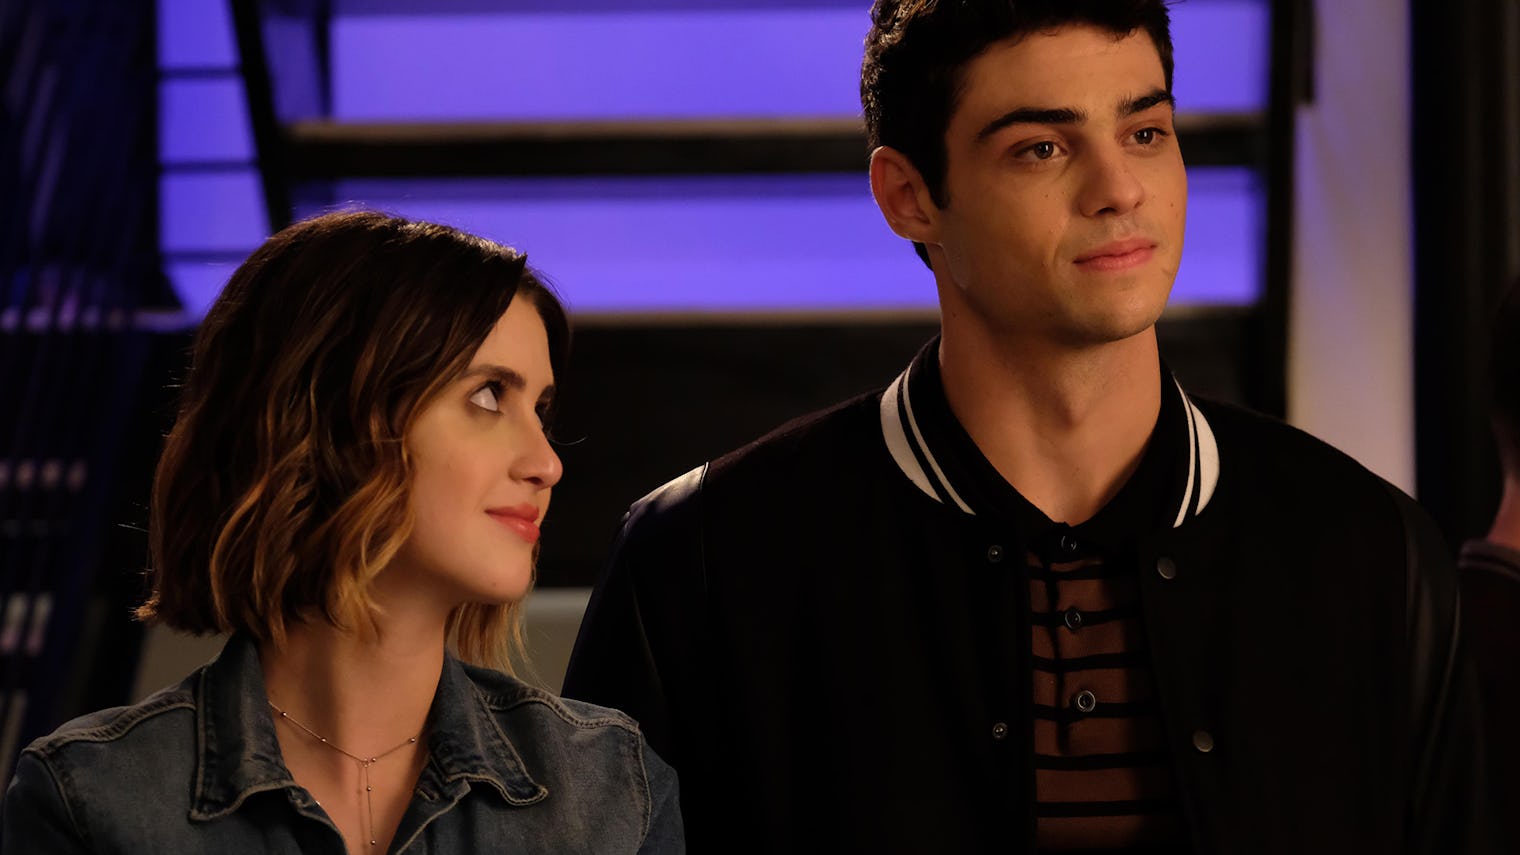 Netflixs Trailer For The Perfect Date Will Make Every Noah Centineo Fan Swoon — Video